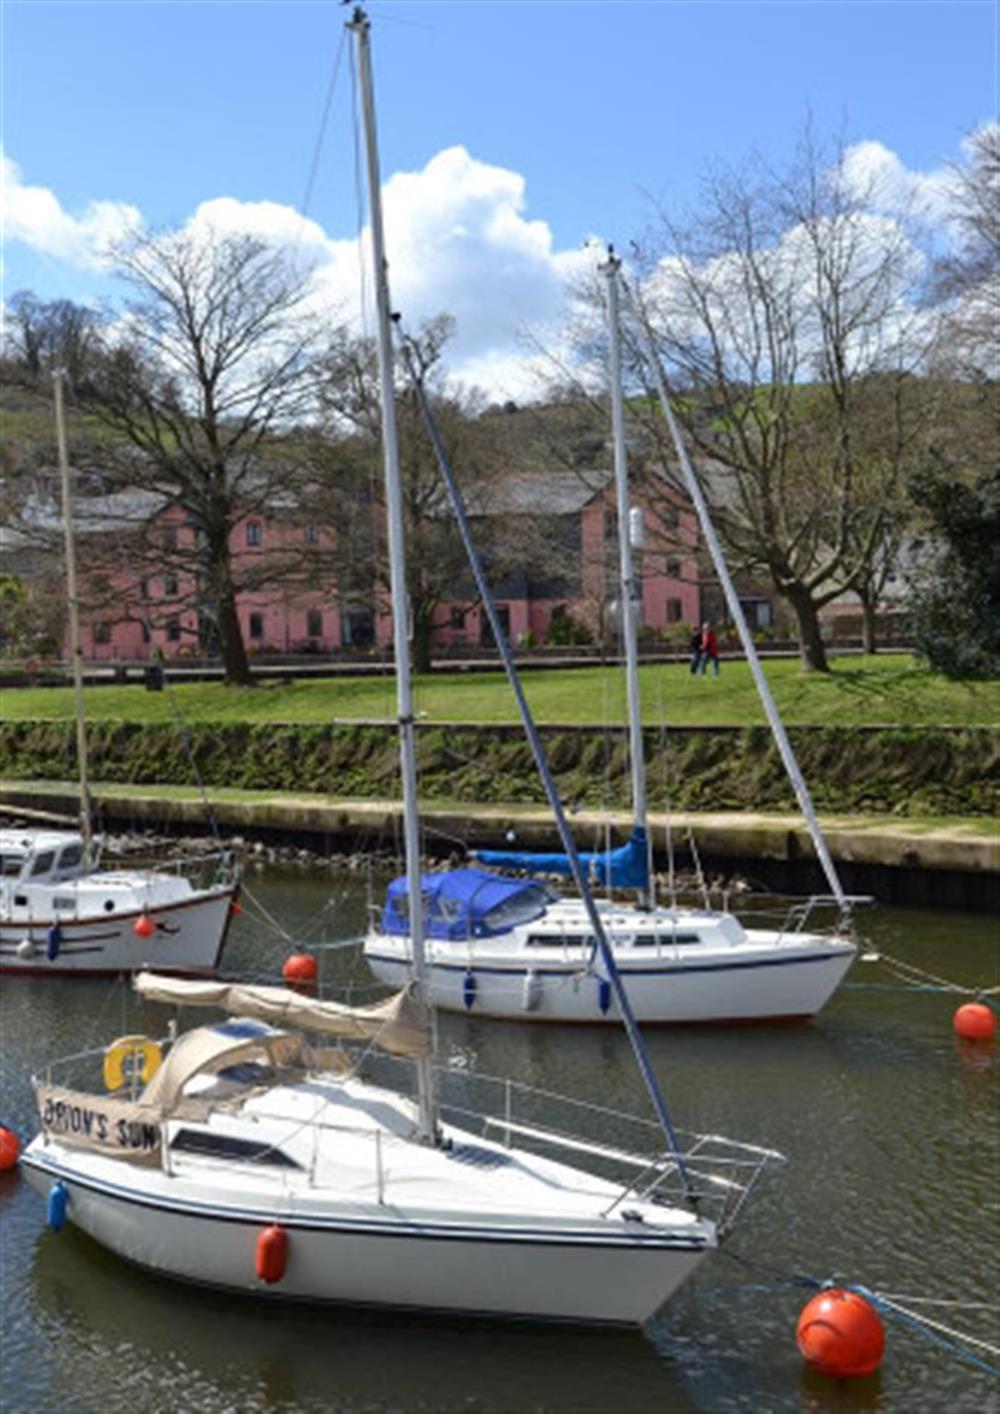 Boats on the River Dart in Totnes at Hideaway in Harbertonford